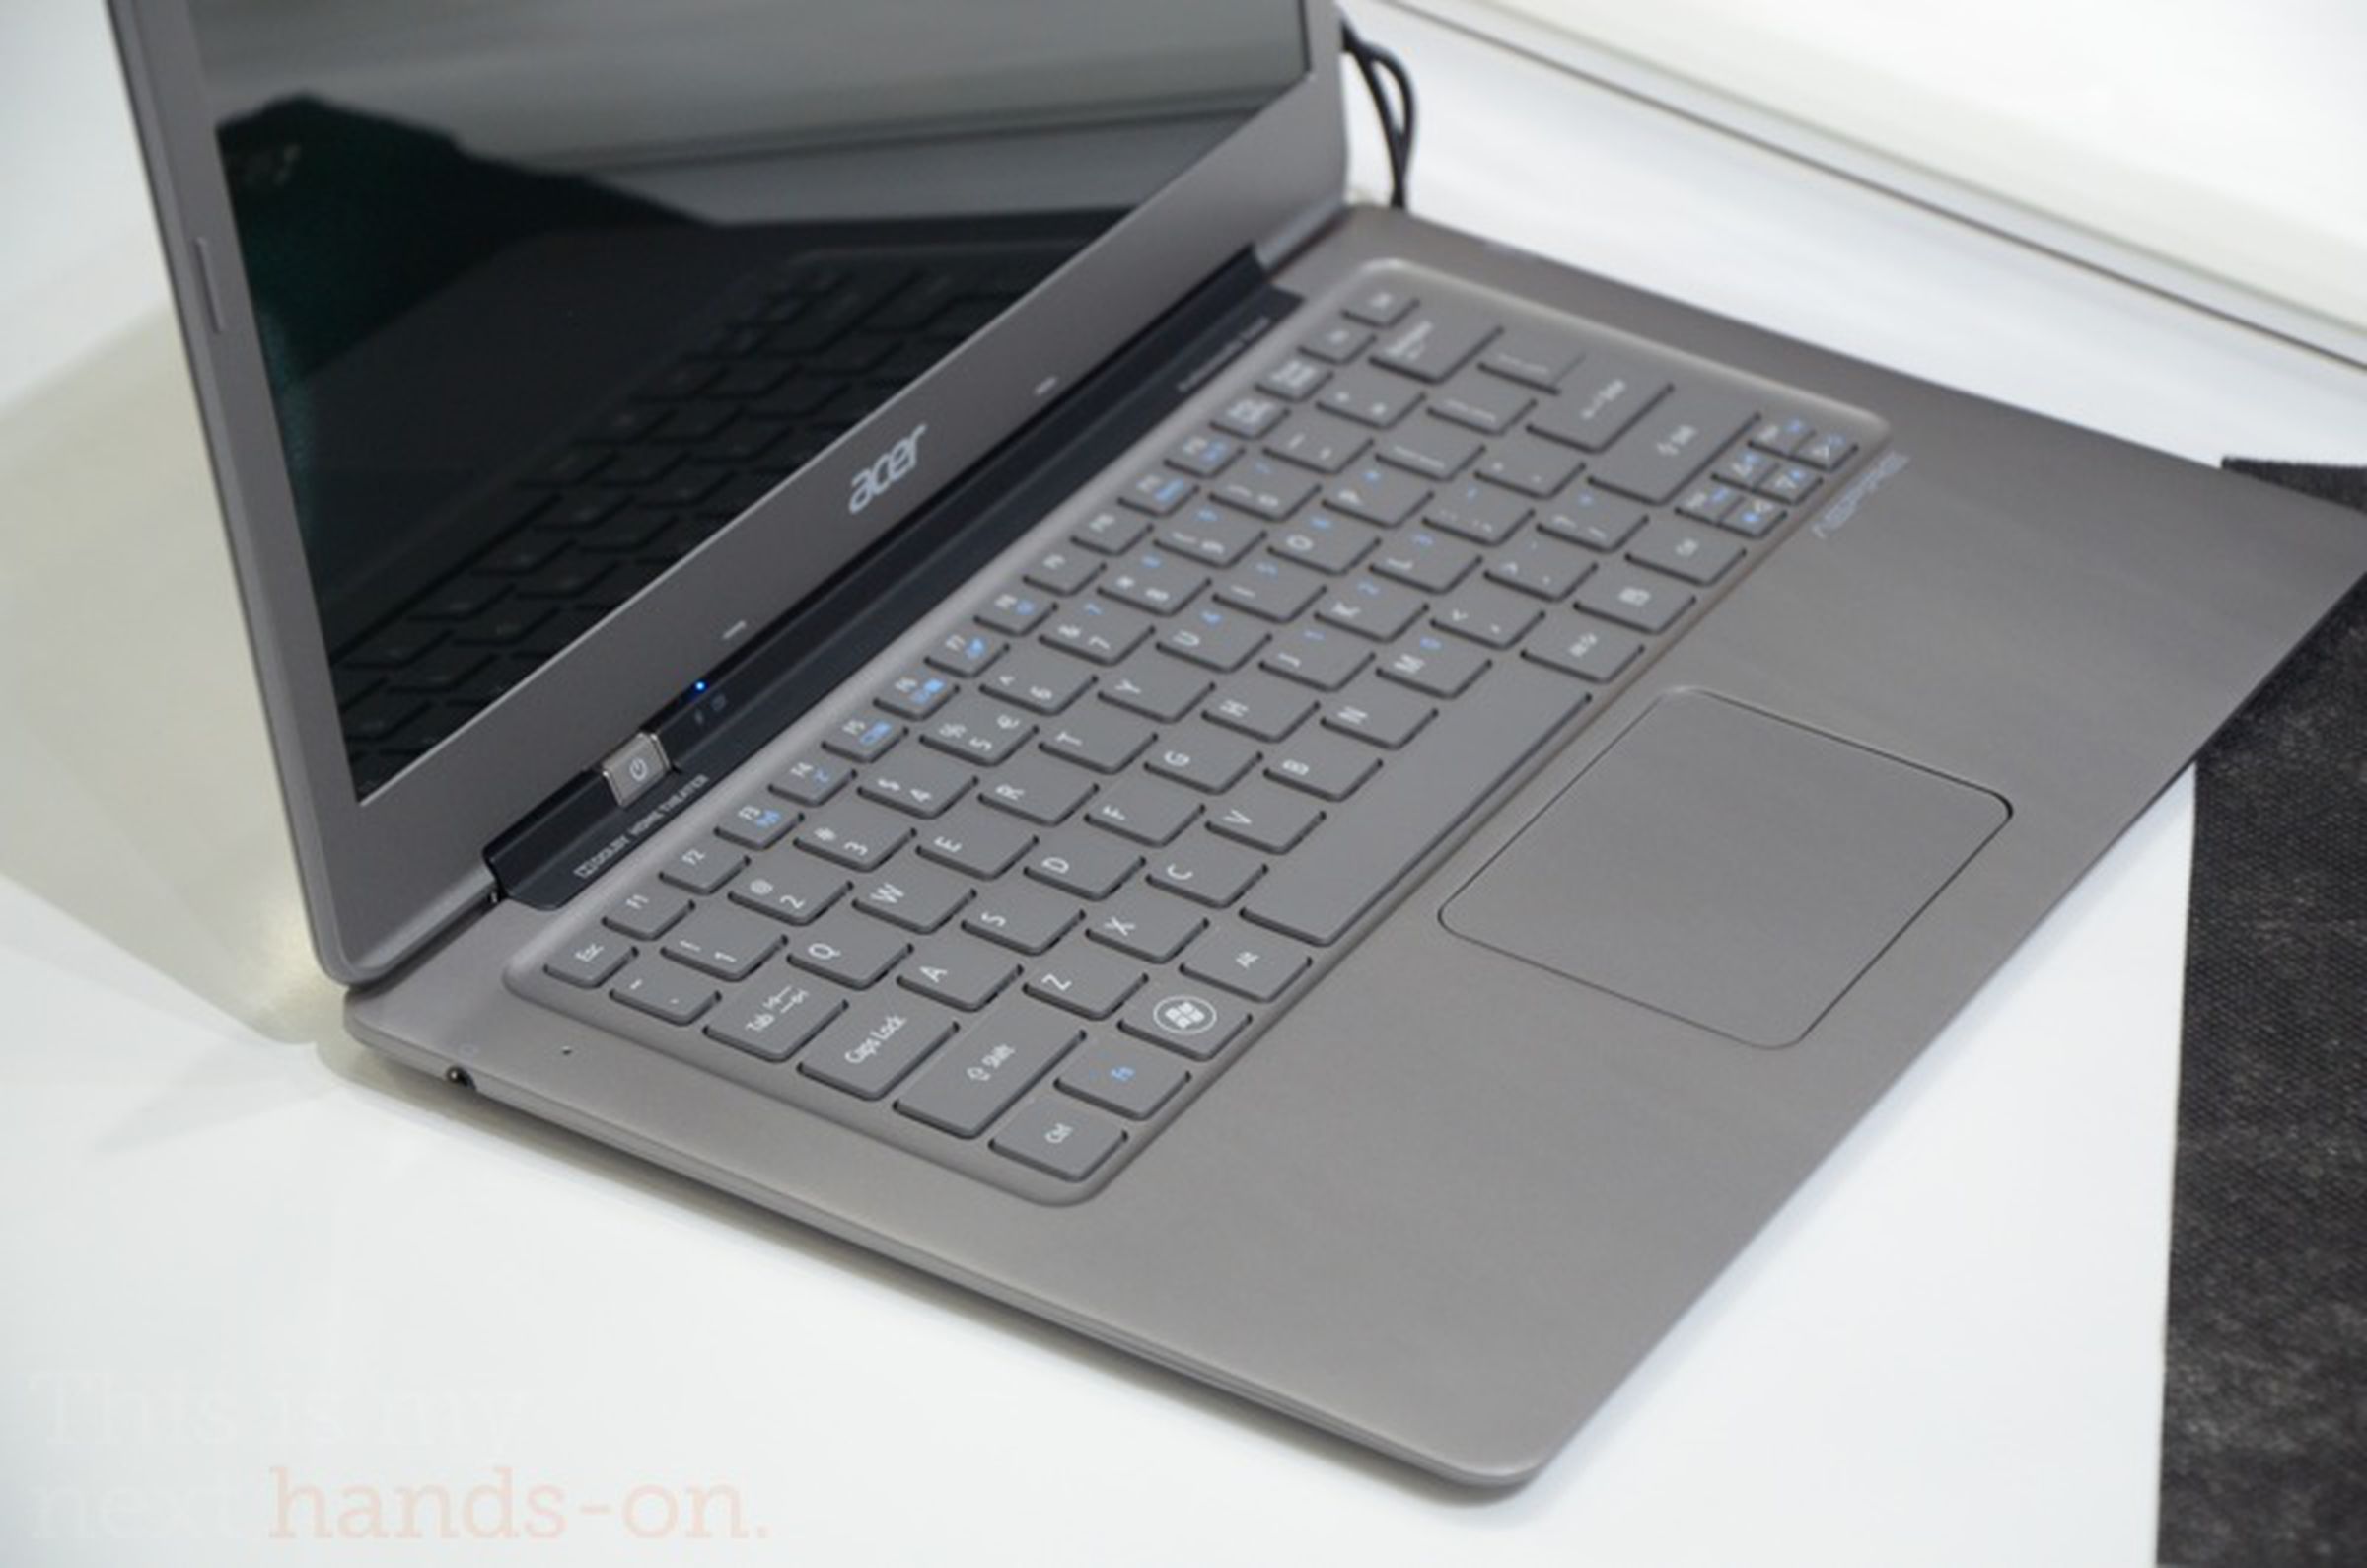 Acer Aspire S3 hands-on photos